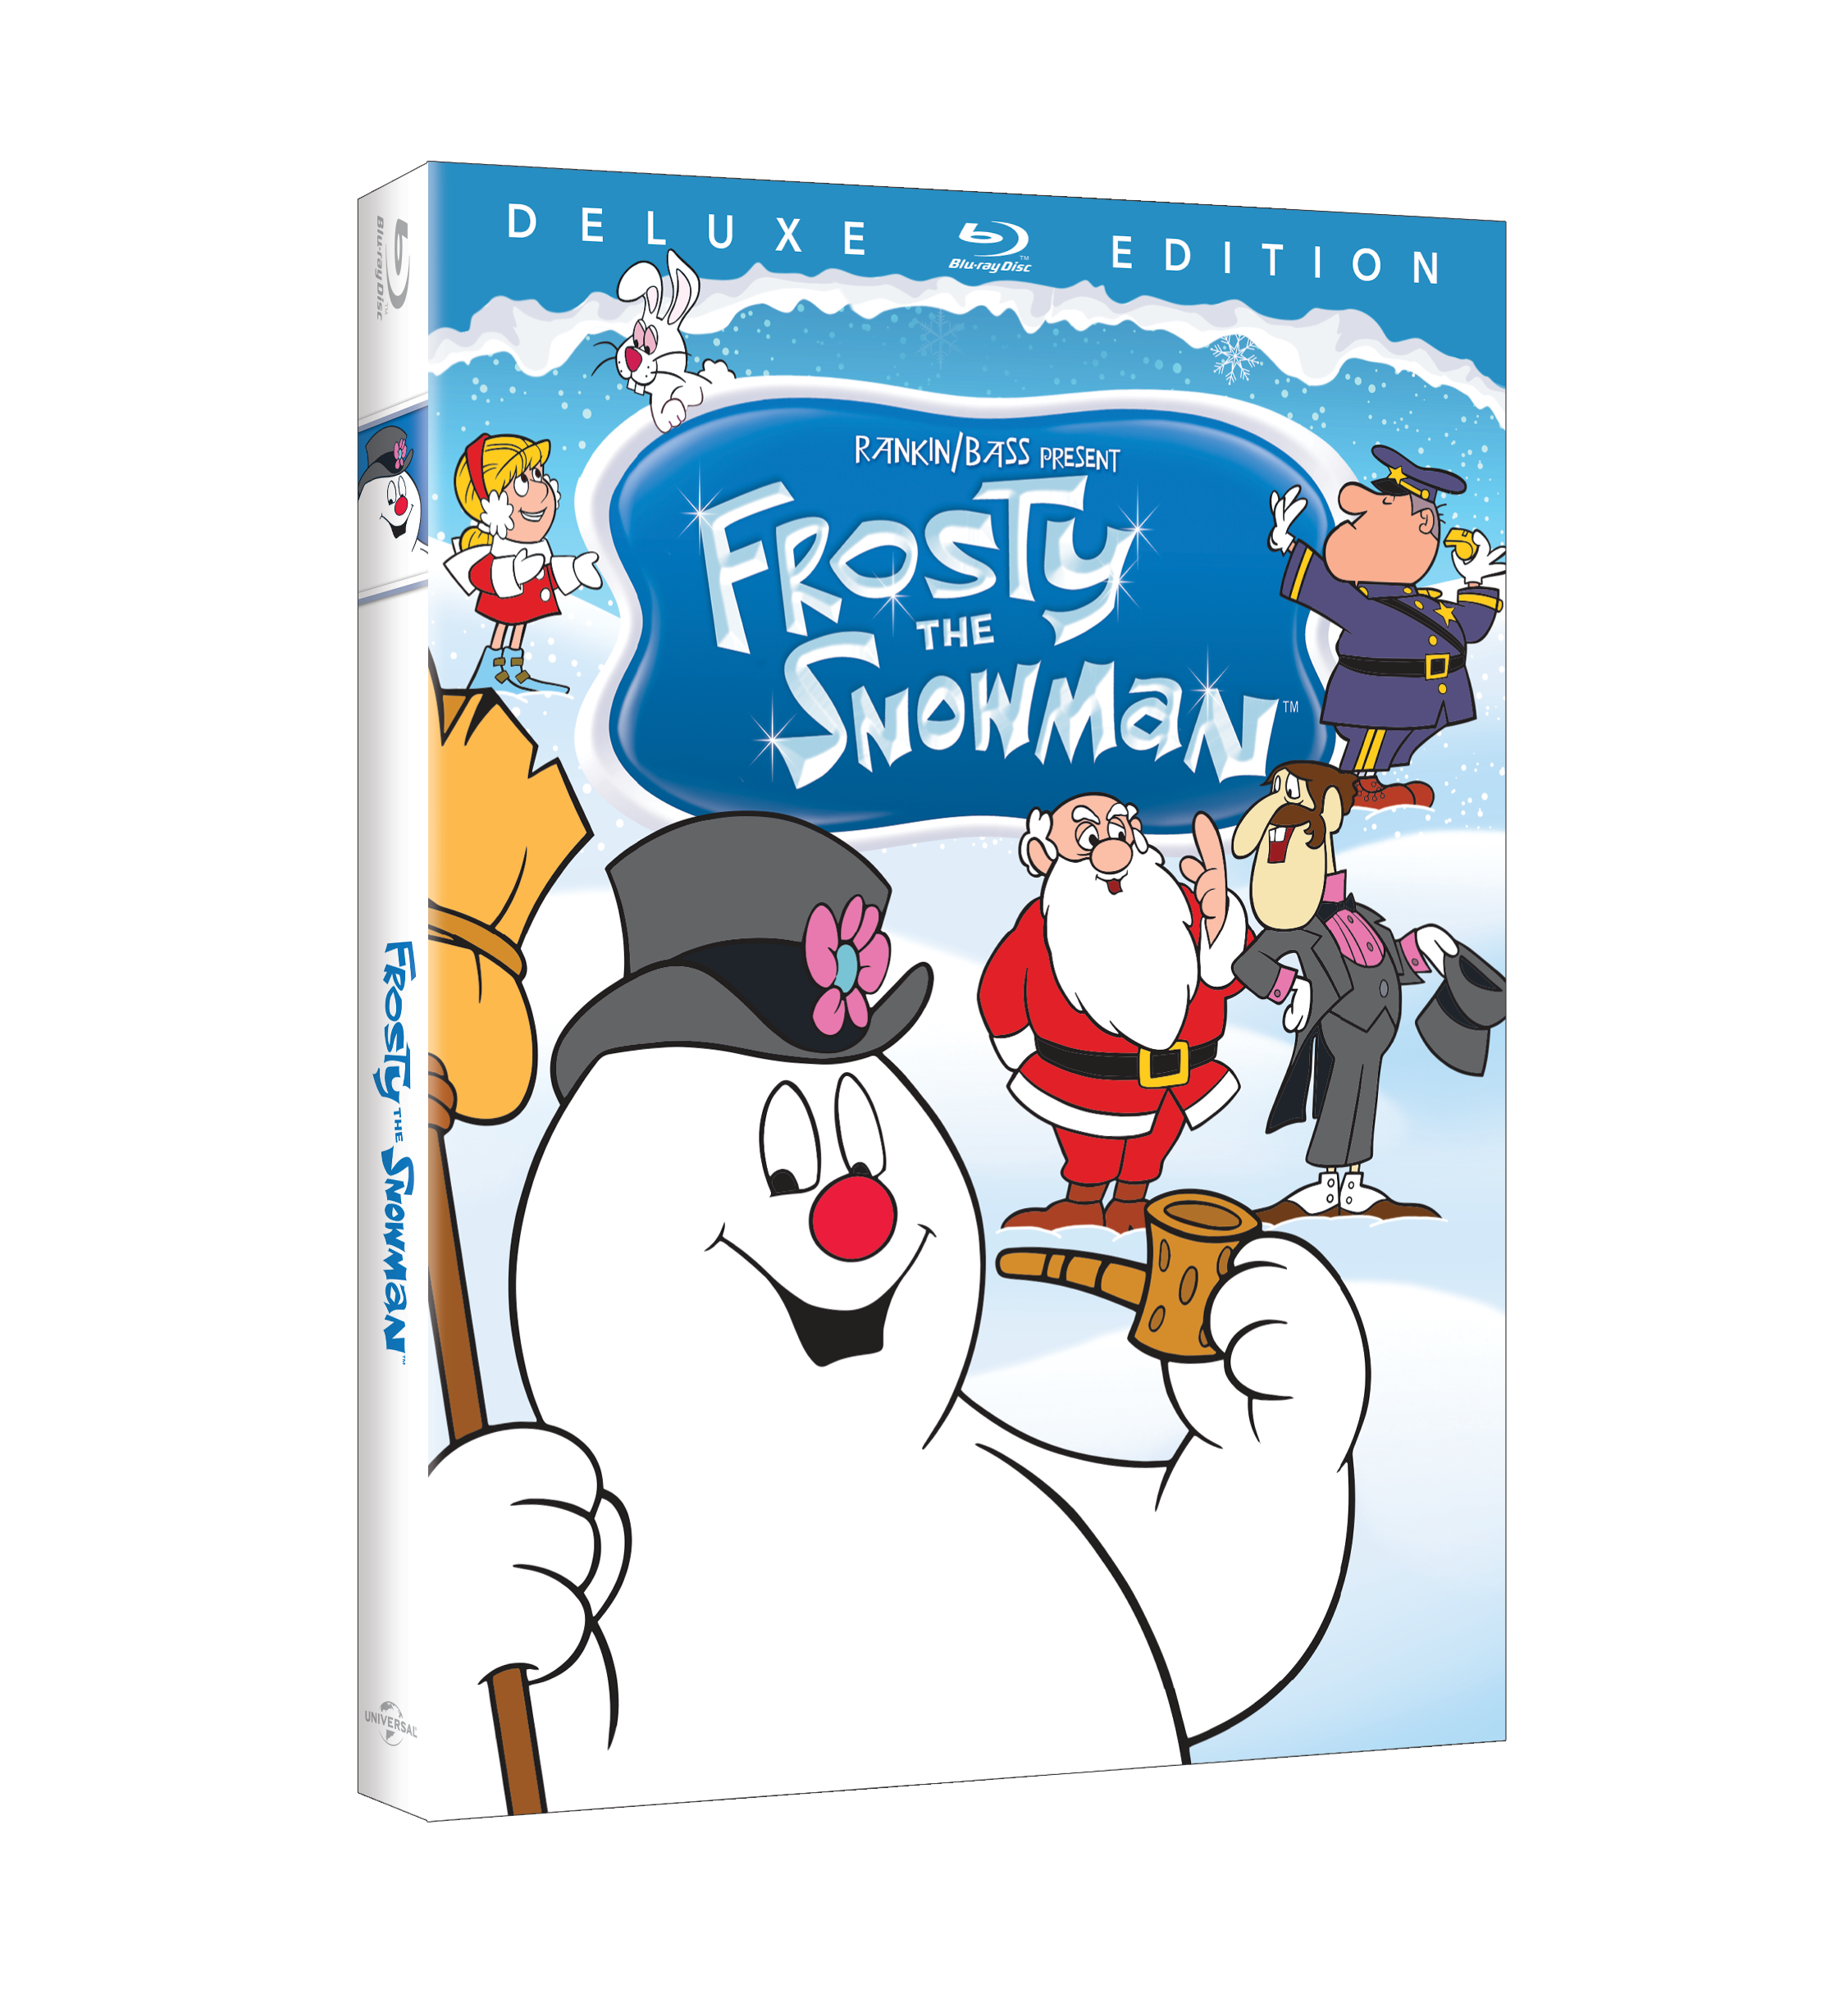 Frosty The Snowman Deluxe Edition Blu-Ray cover (Universal Pictures Home Entertainment)